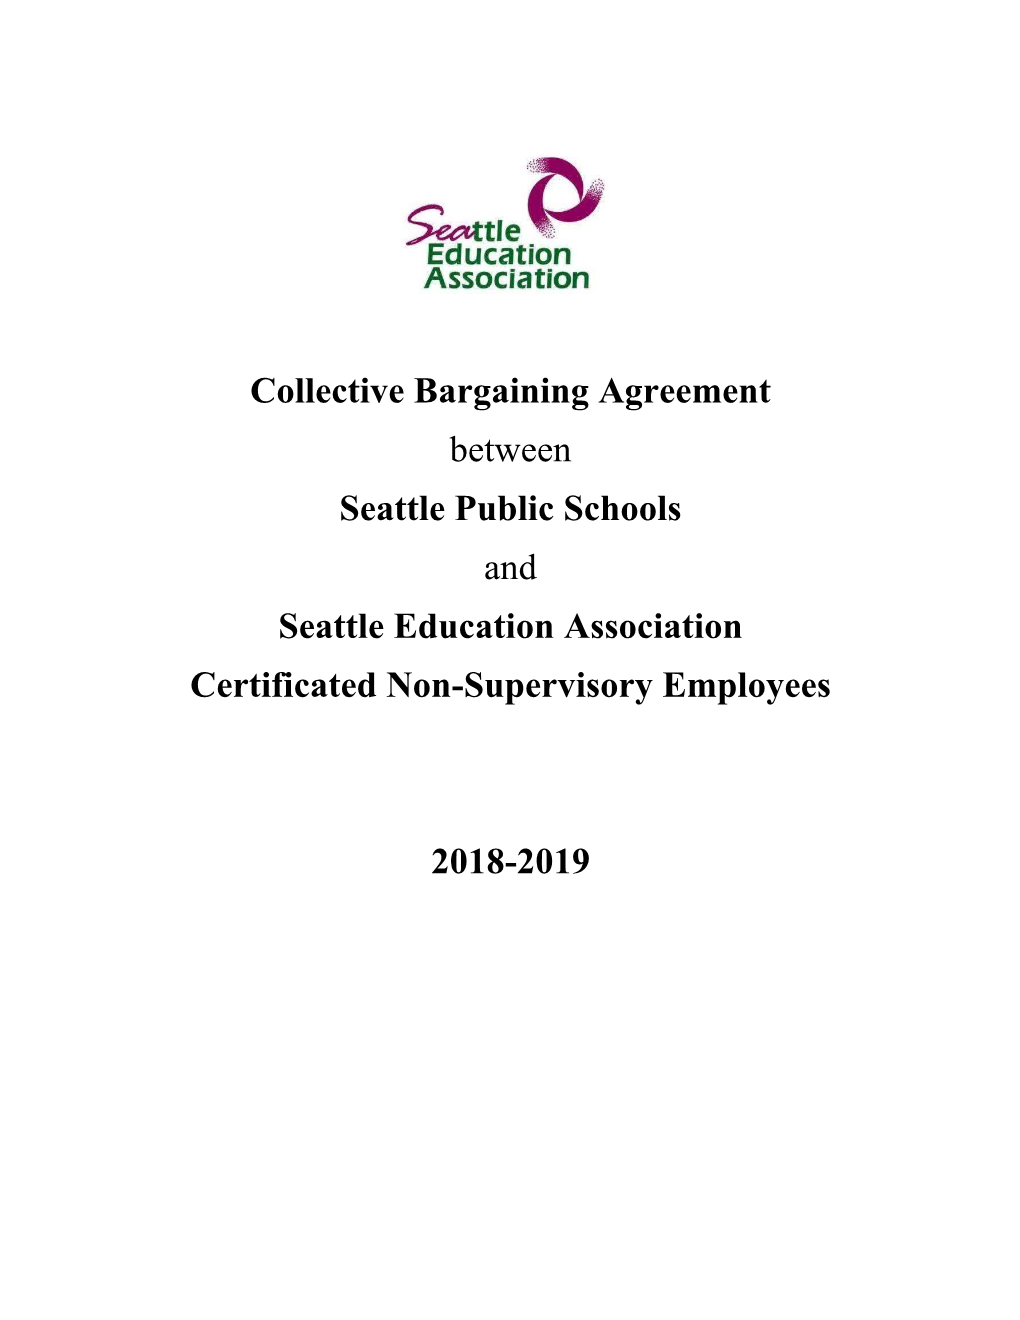 Collective Bargaining Agreement Between Seattle Public Schools and Seattle Education Association Certificated Non-Supervisory Employees